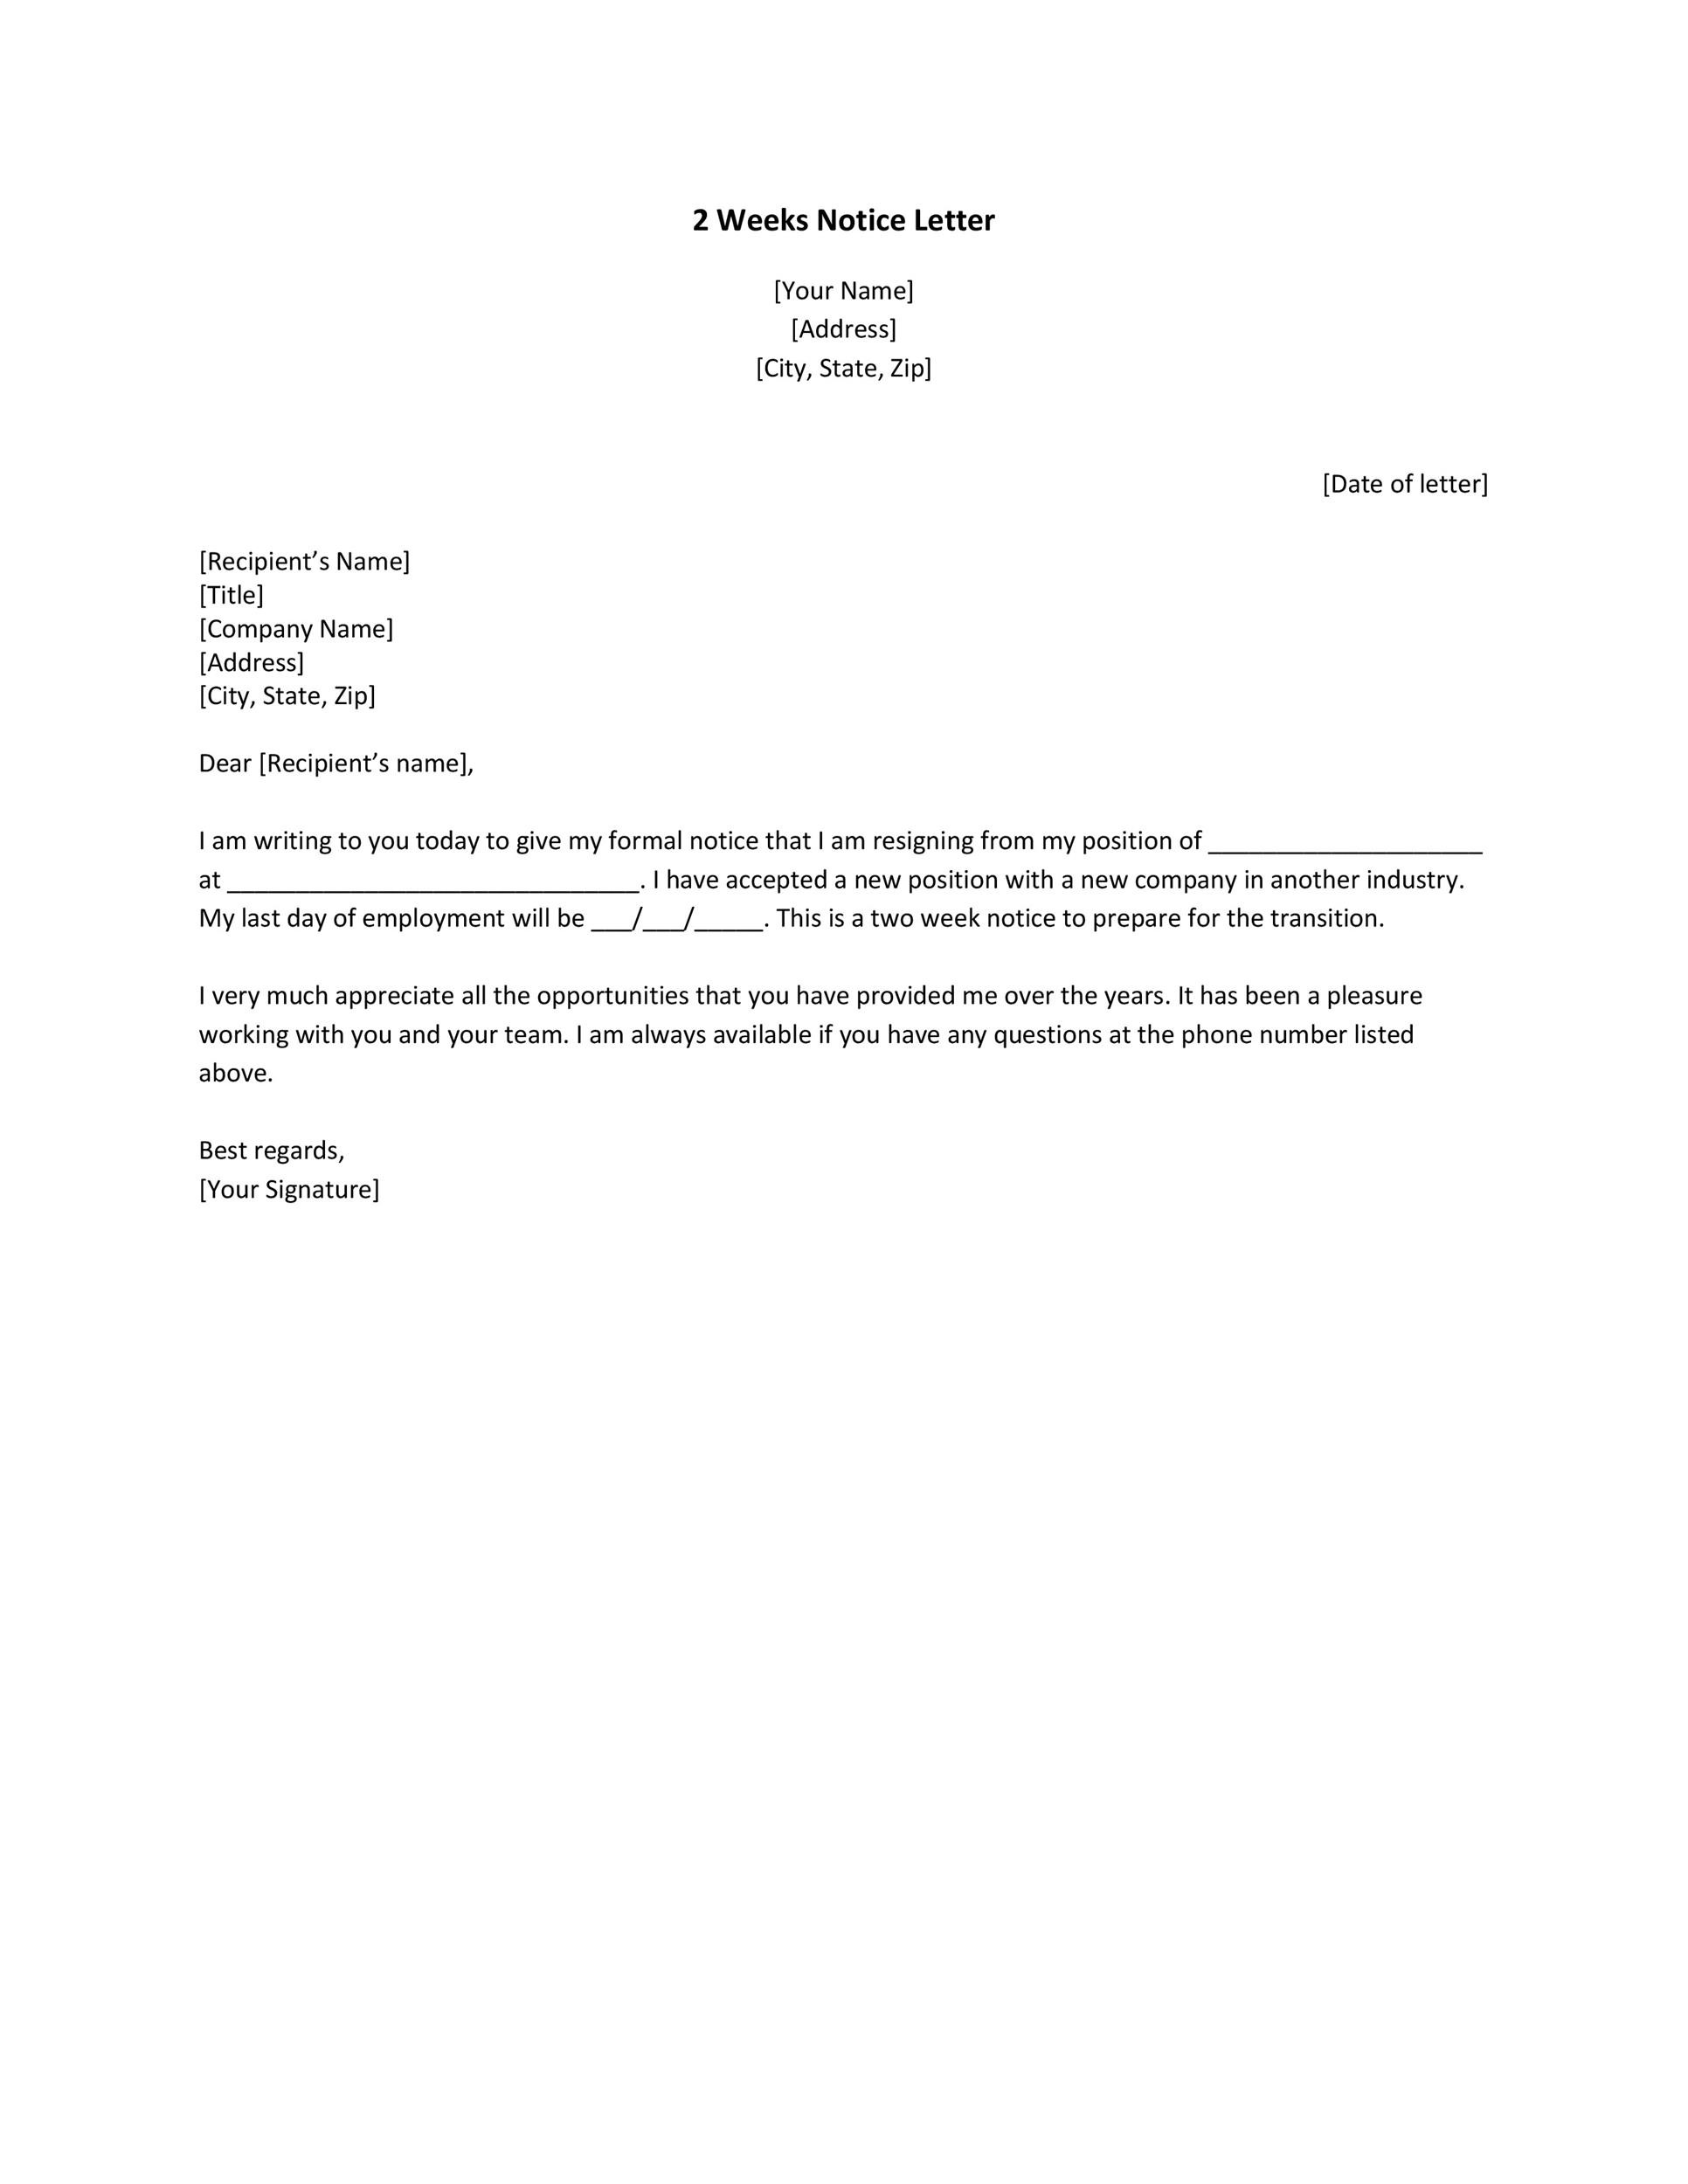 Two Week Resignation Letter Templates from templatelab.com